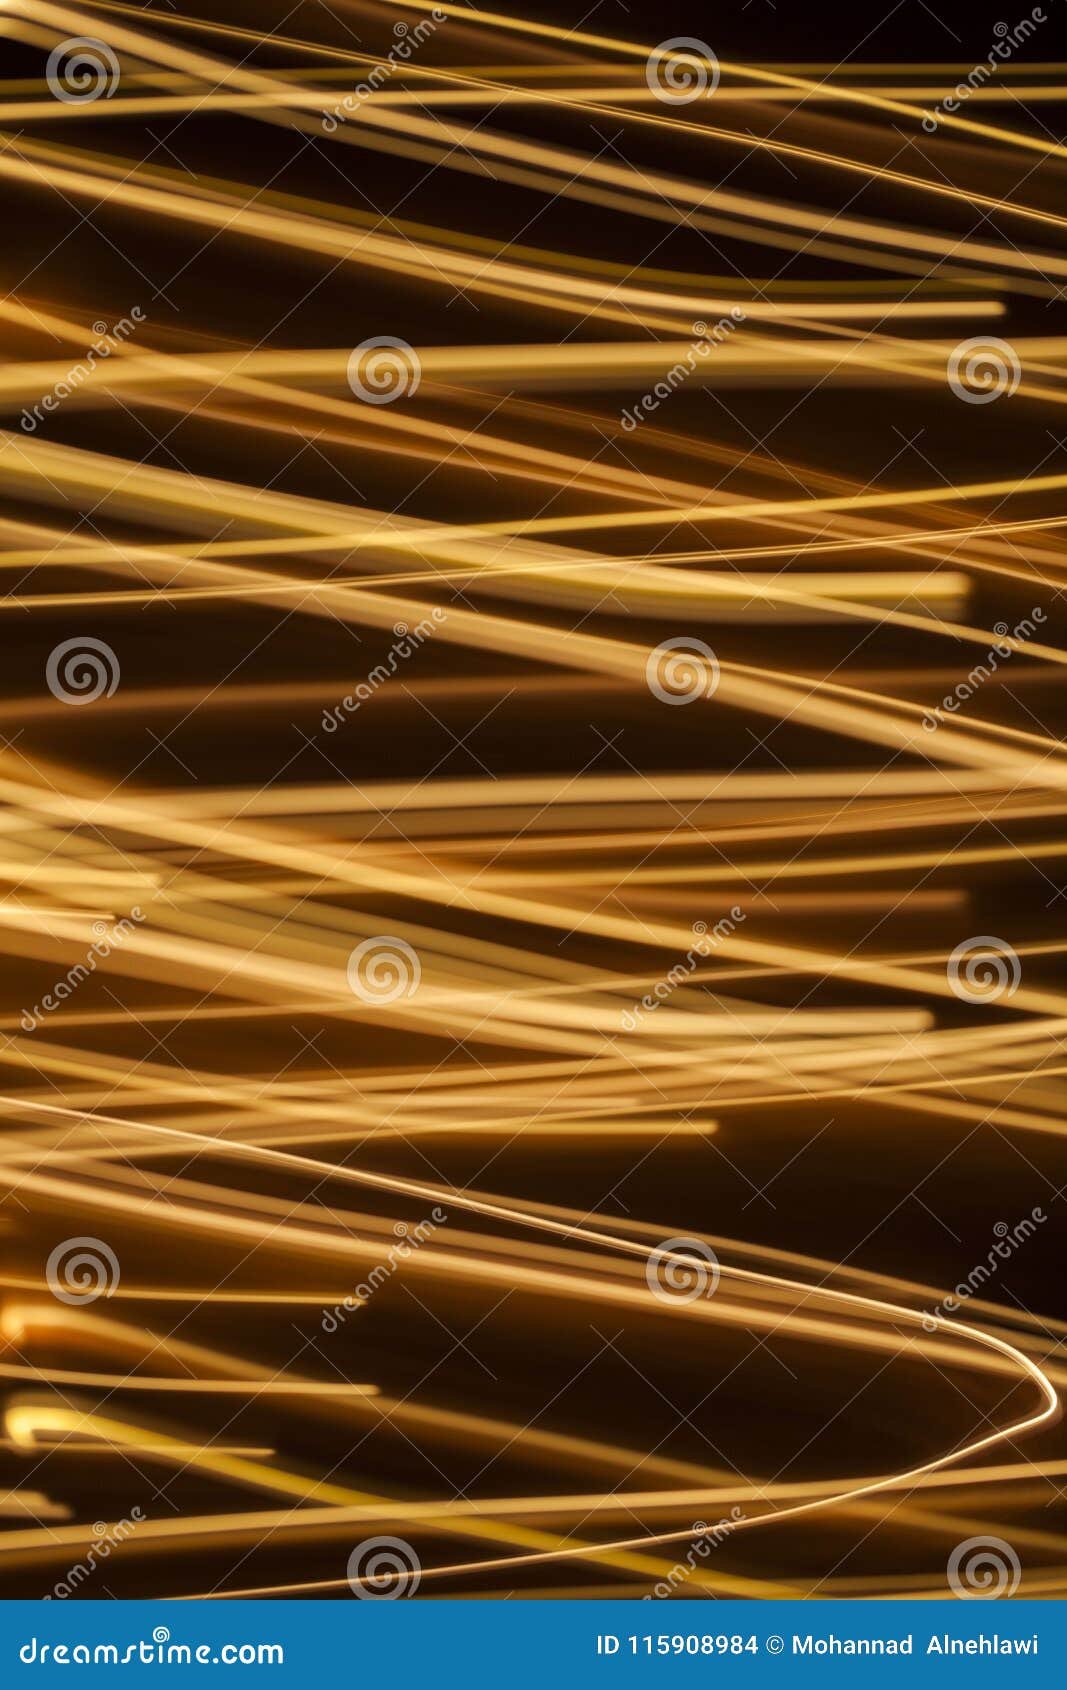 Swirl Sparkling Glowing Lines Background Stock Photo - Image of color ...